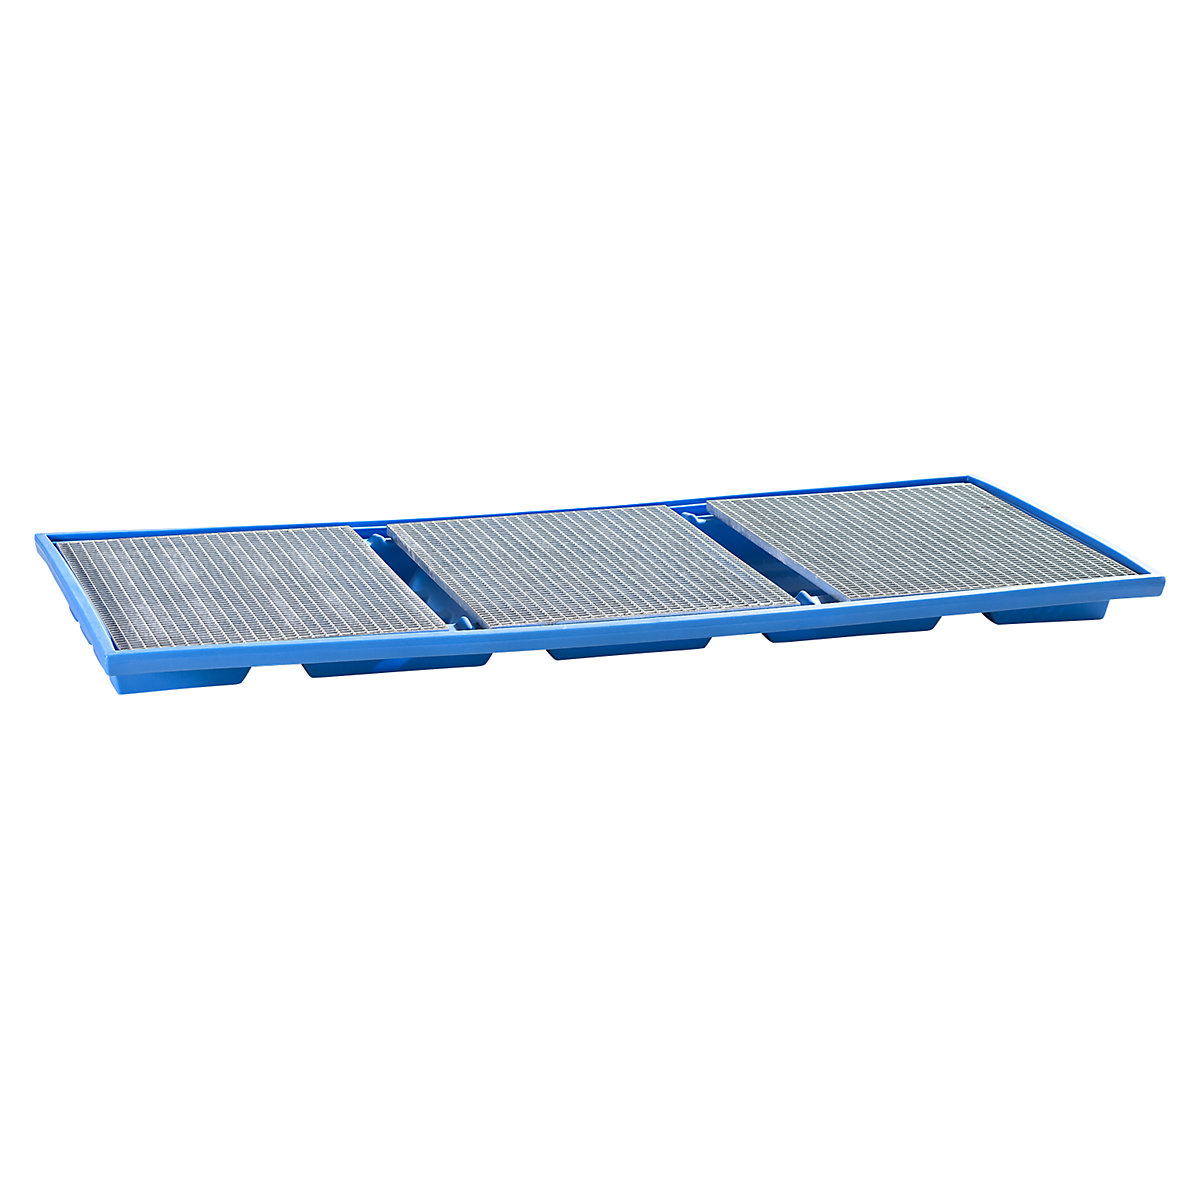 Hook-in sump tray, made of polyethylene, LxH 2680 x 180 mm, steel grate-5